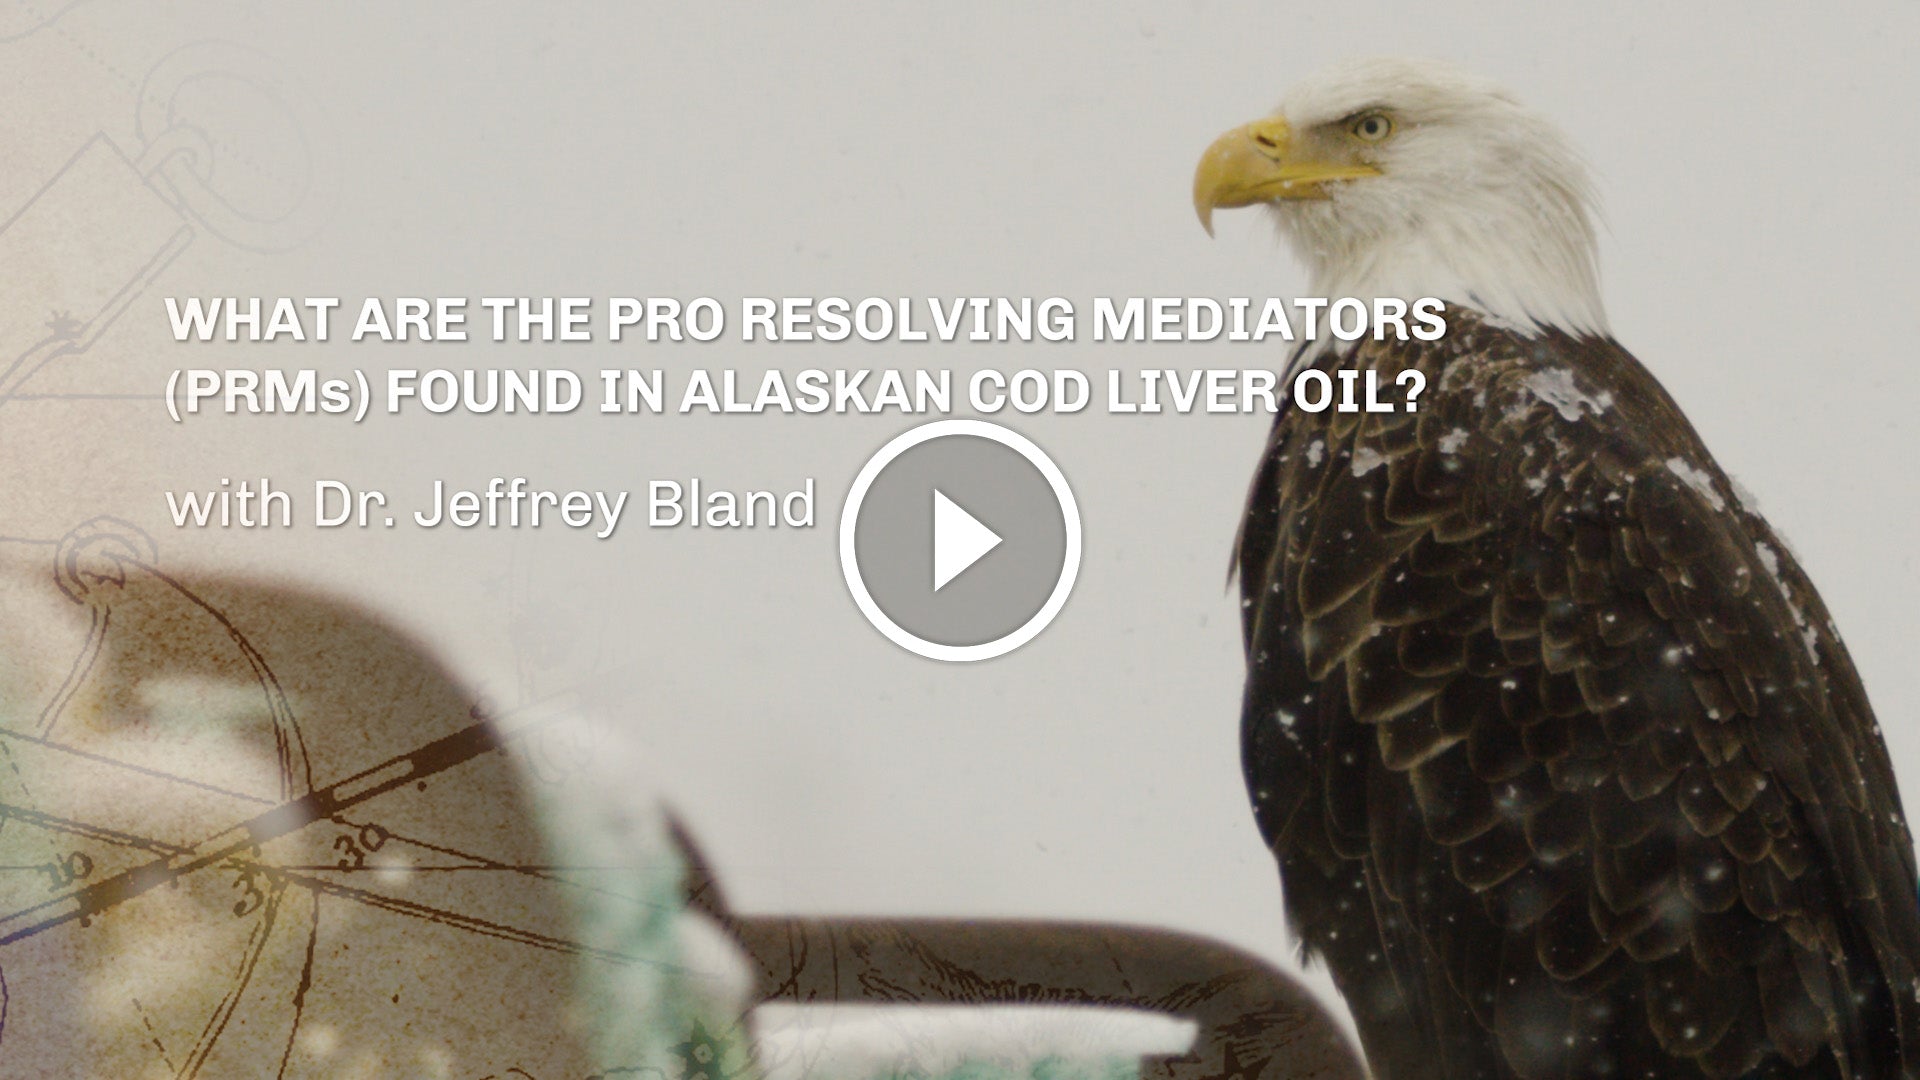 What are the Pro Resolving Mediators (PRMs) found in Alaskan Cod Liver Oil? With Dr. Jeffrey Bland